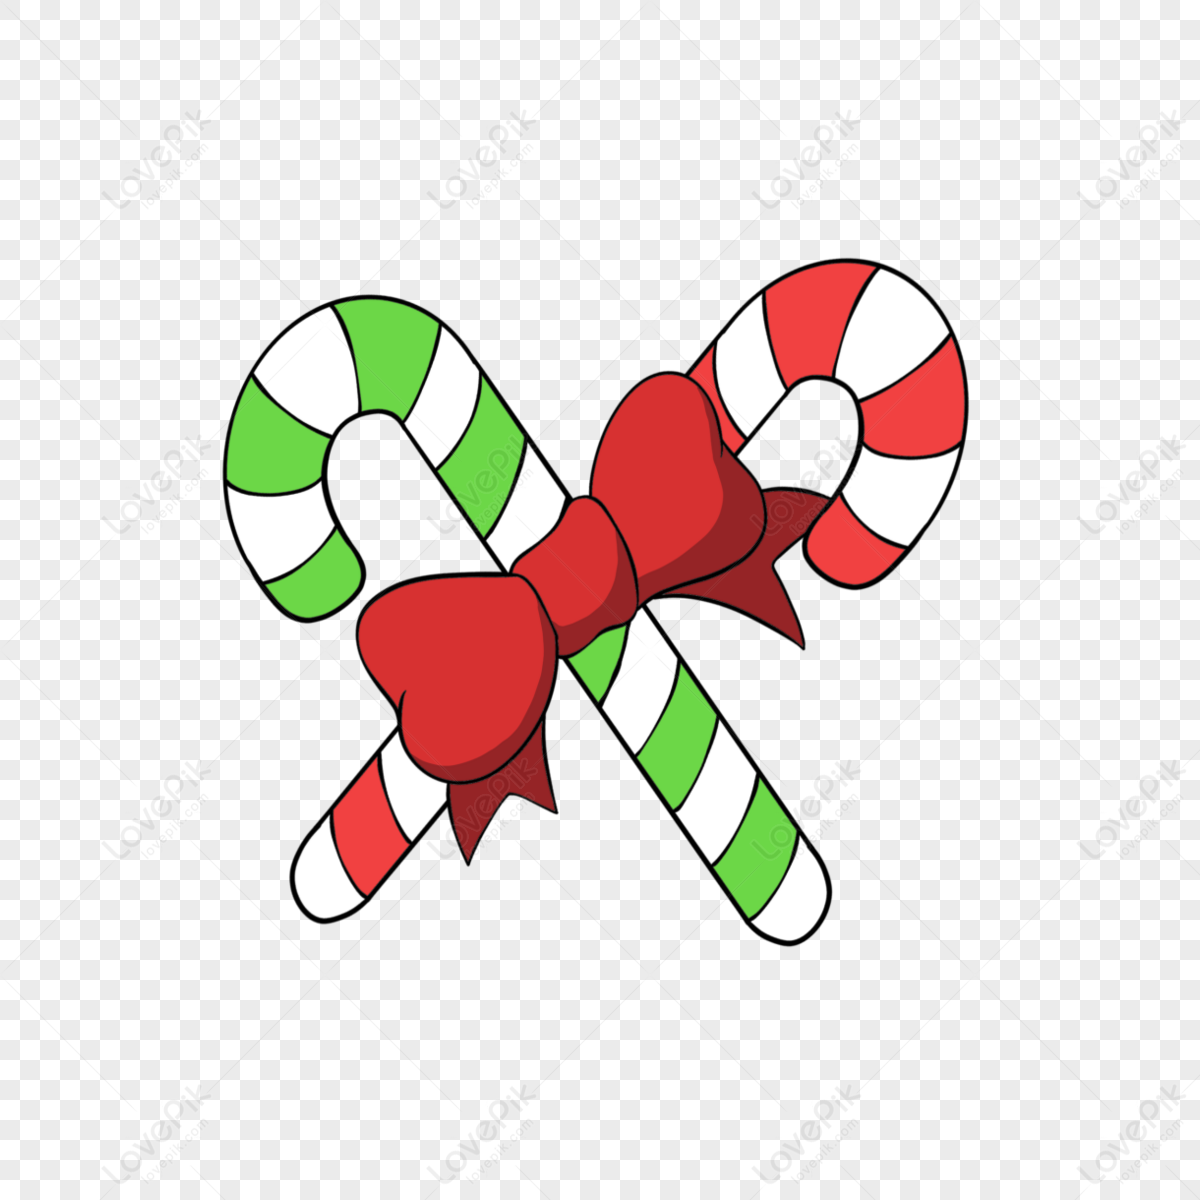 Christmas Candy Cartoon Christmas Candies, Candy PNG Transparent  Background, Carties Free PNG Image, Cartoon PNG Transparent Background PNG  Transparent Background And Clipart Image For Free Download - Lovepik |  375554380